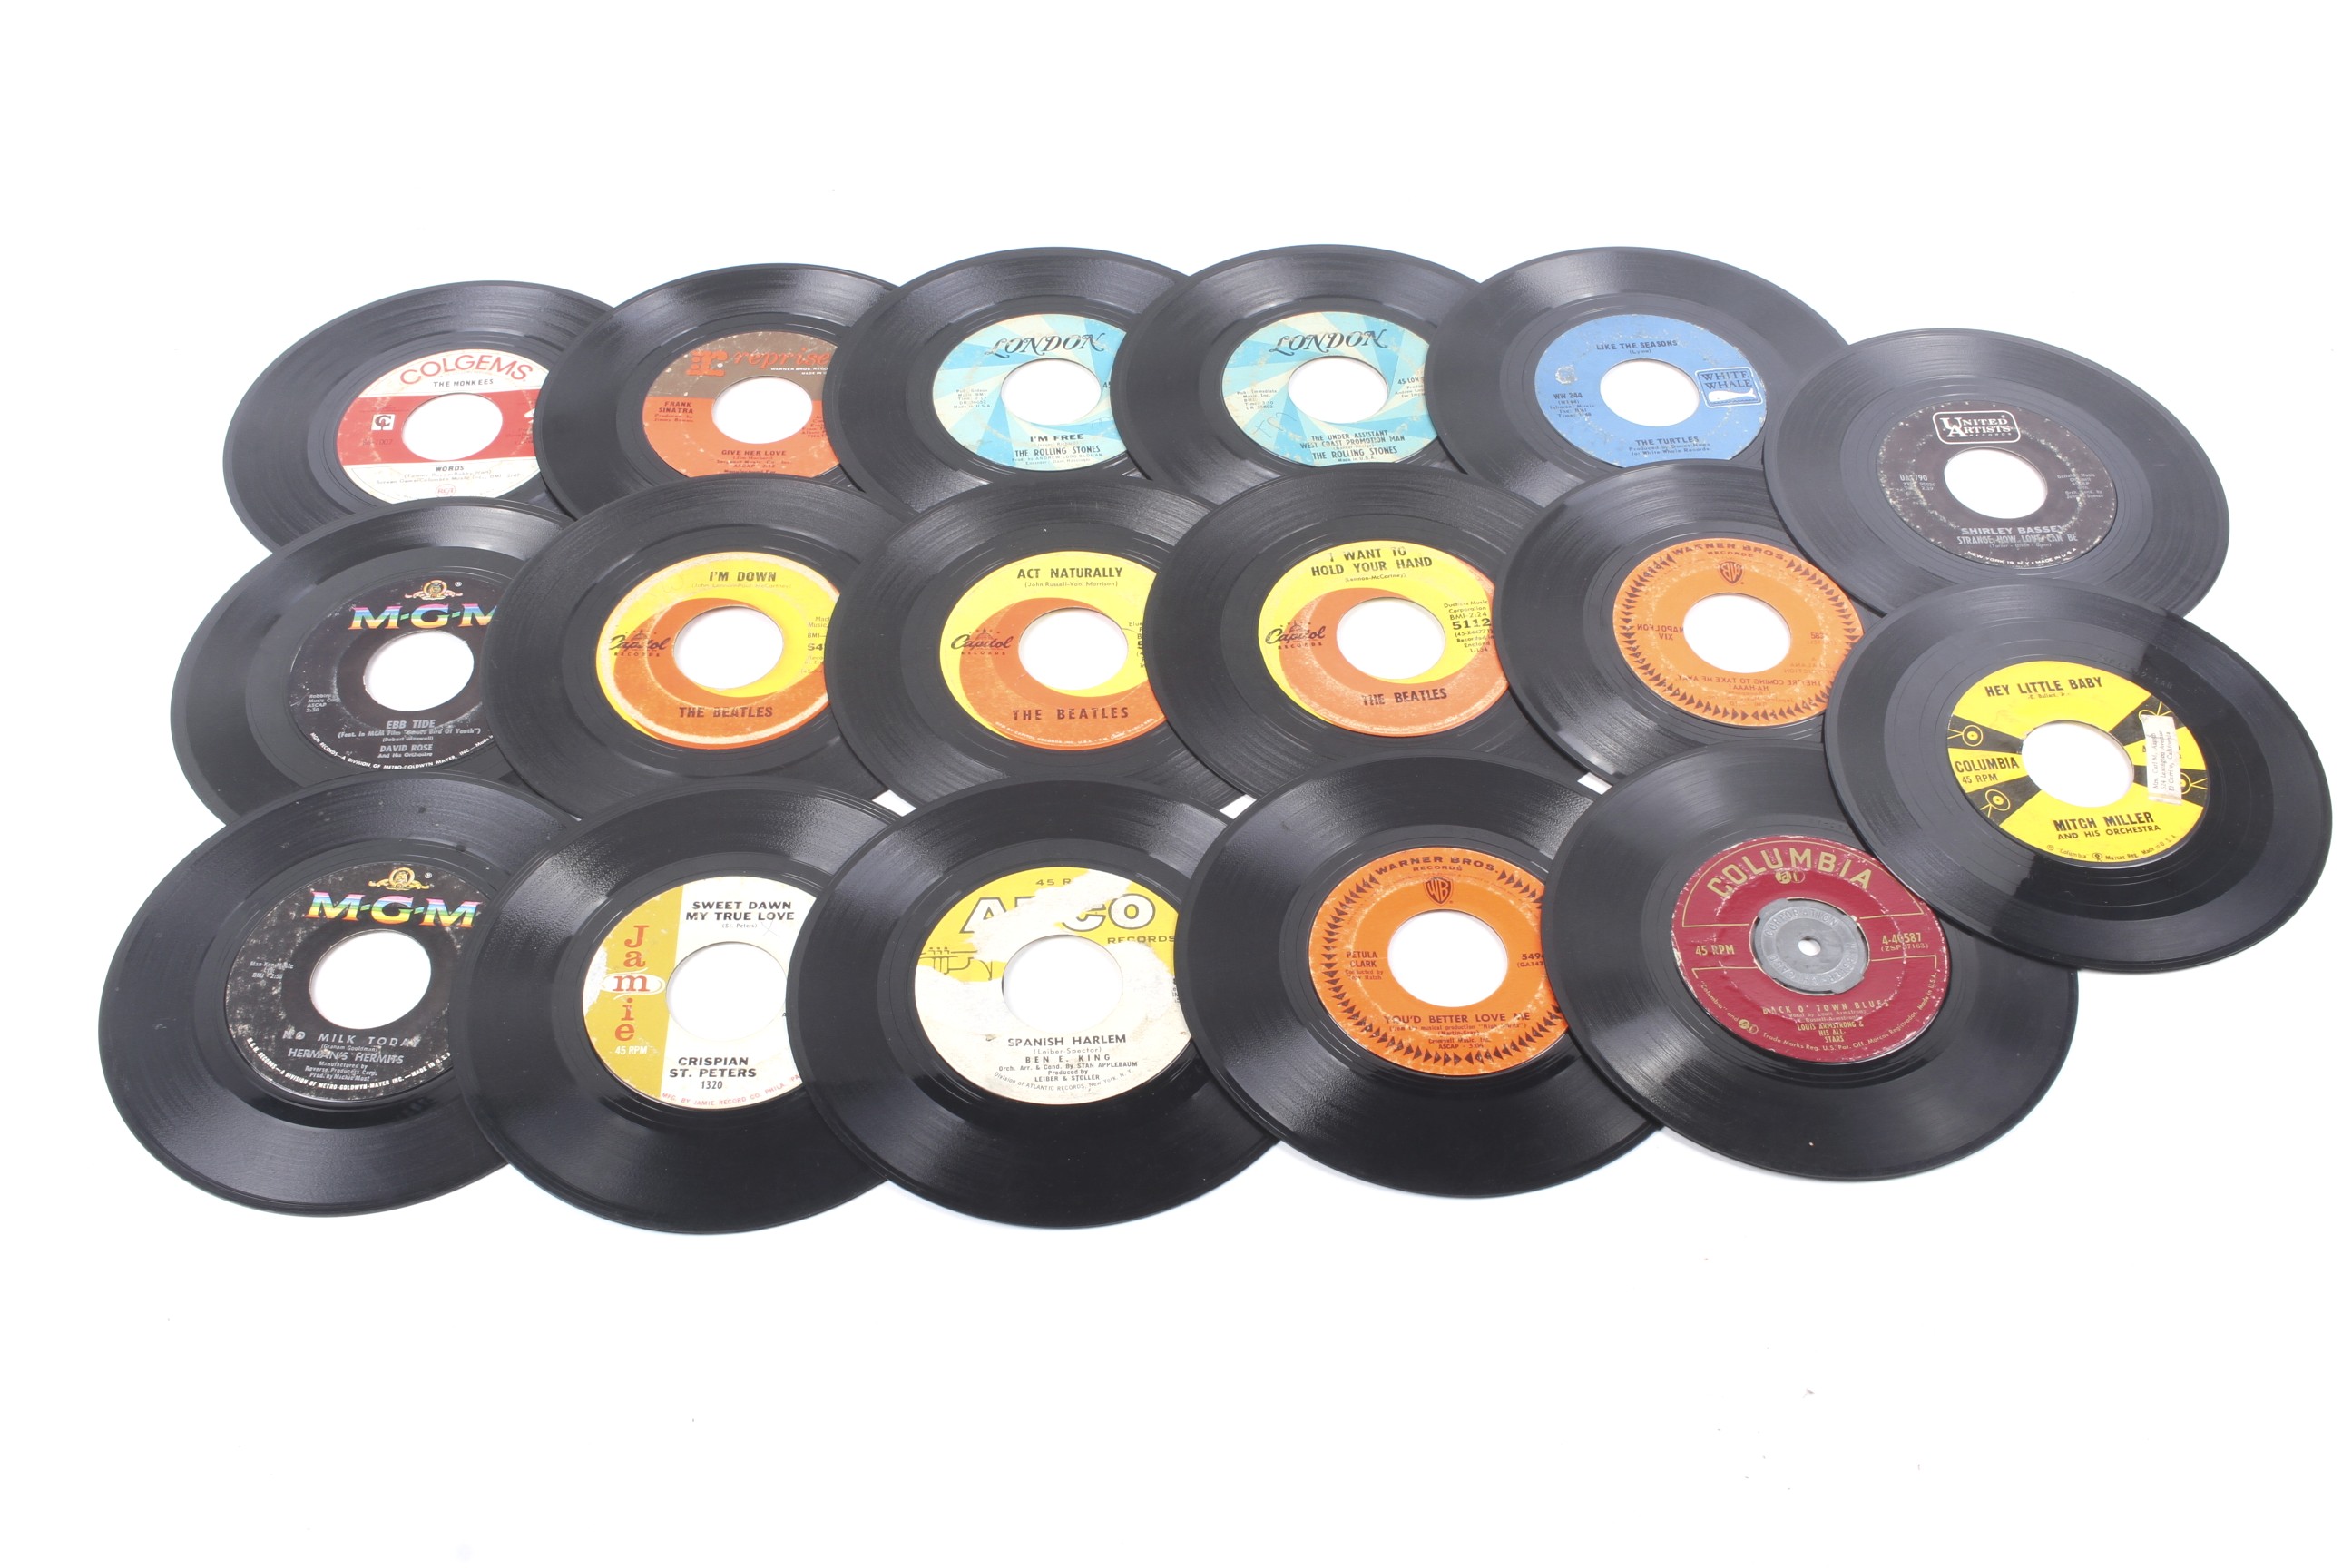 A collection of jukebox 7" vinyl singles.